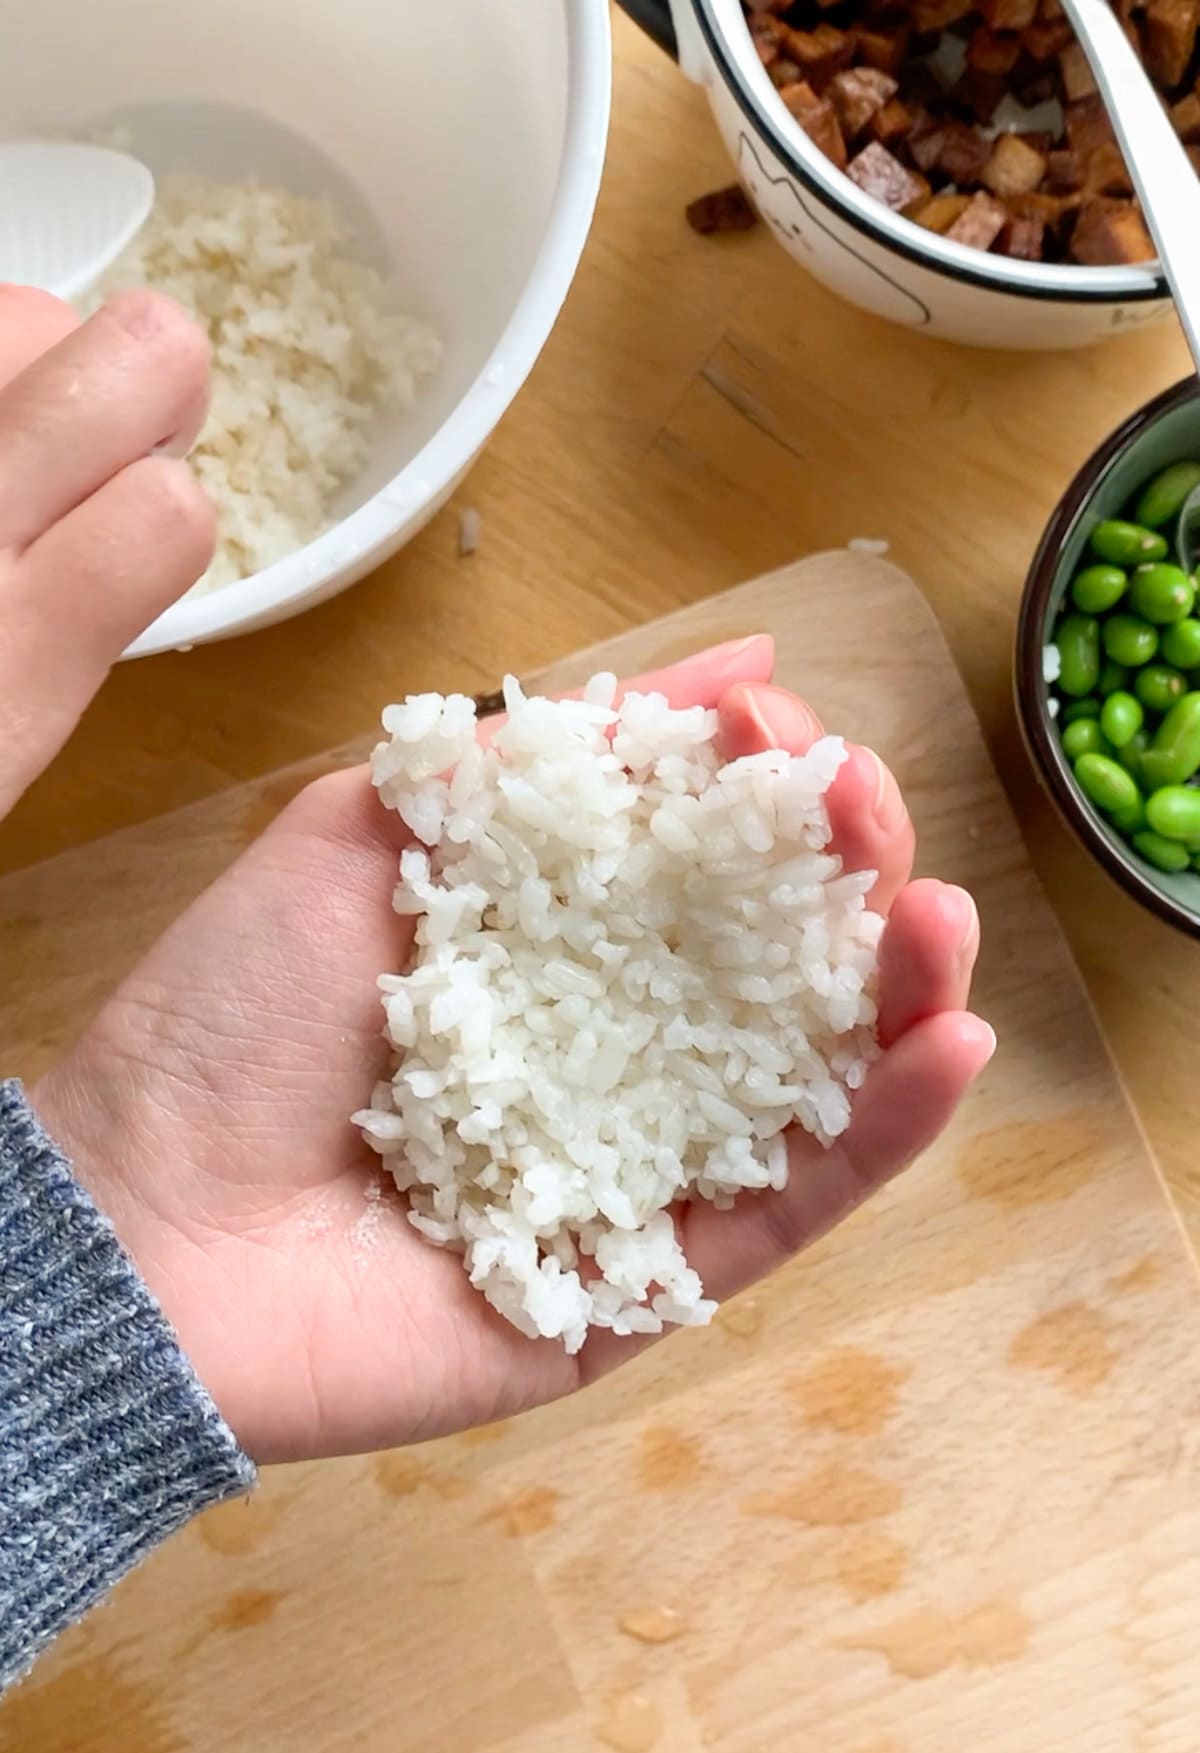 Add rice to your hand